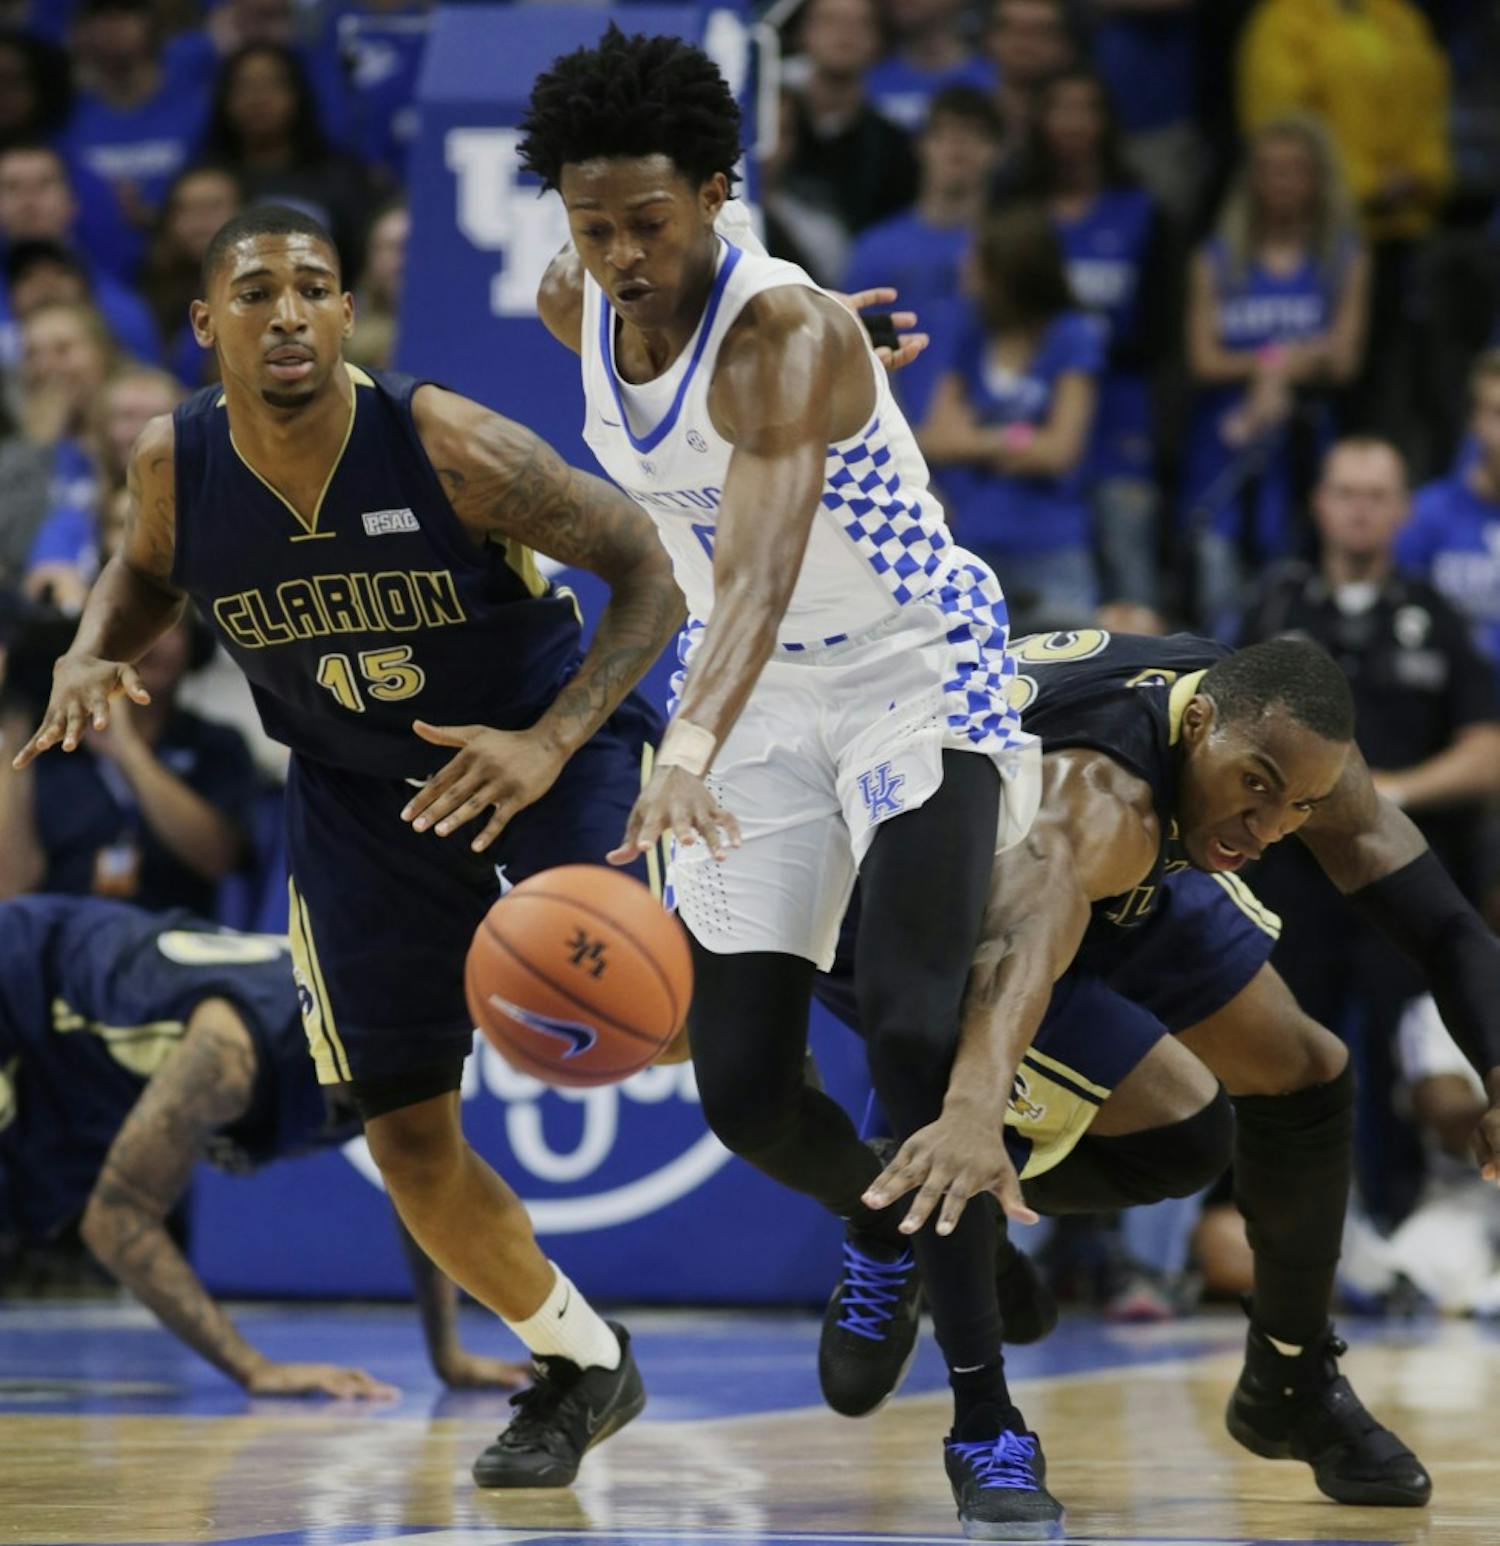 Kentucky Wildcats' De'Aaron Fox (0) outmaneuvers Clarion's Jamani Pierce (15)  and Akeem Williams, right, in the first half on Sunday, Oct. 30, 2016 at Rupp Arena in Lexington, Ky. (Pablo Alcala/Lexington Herald-Leader/TNS)